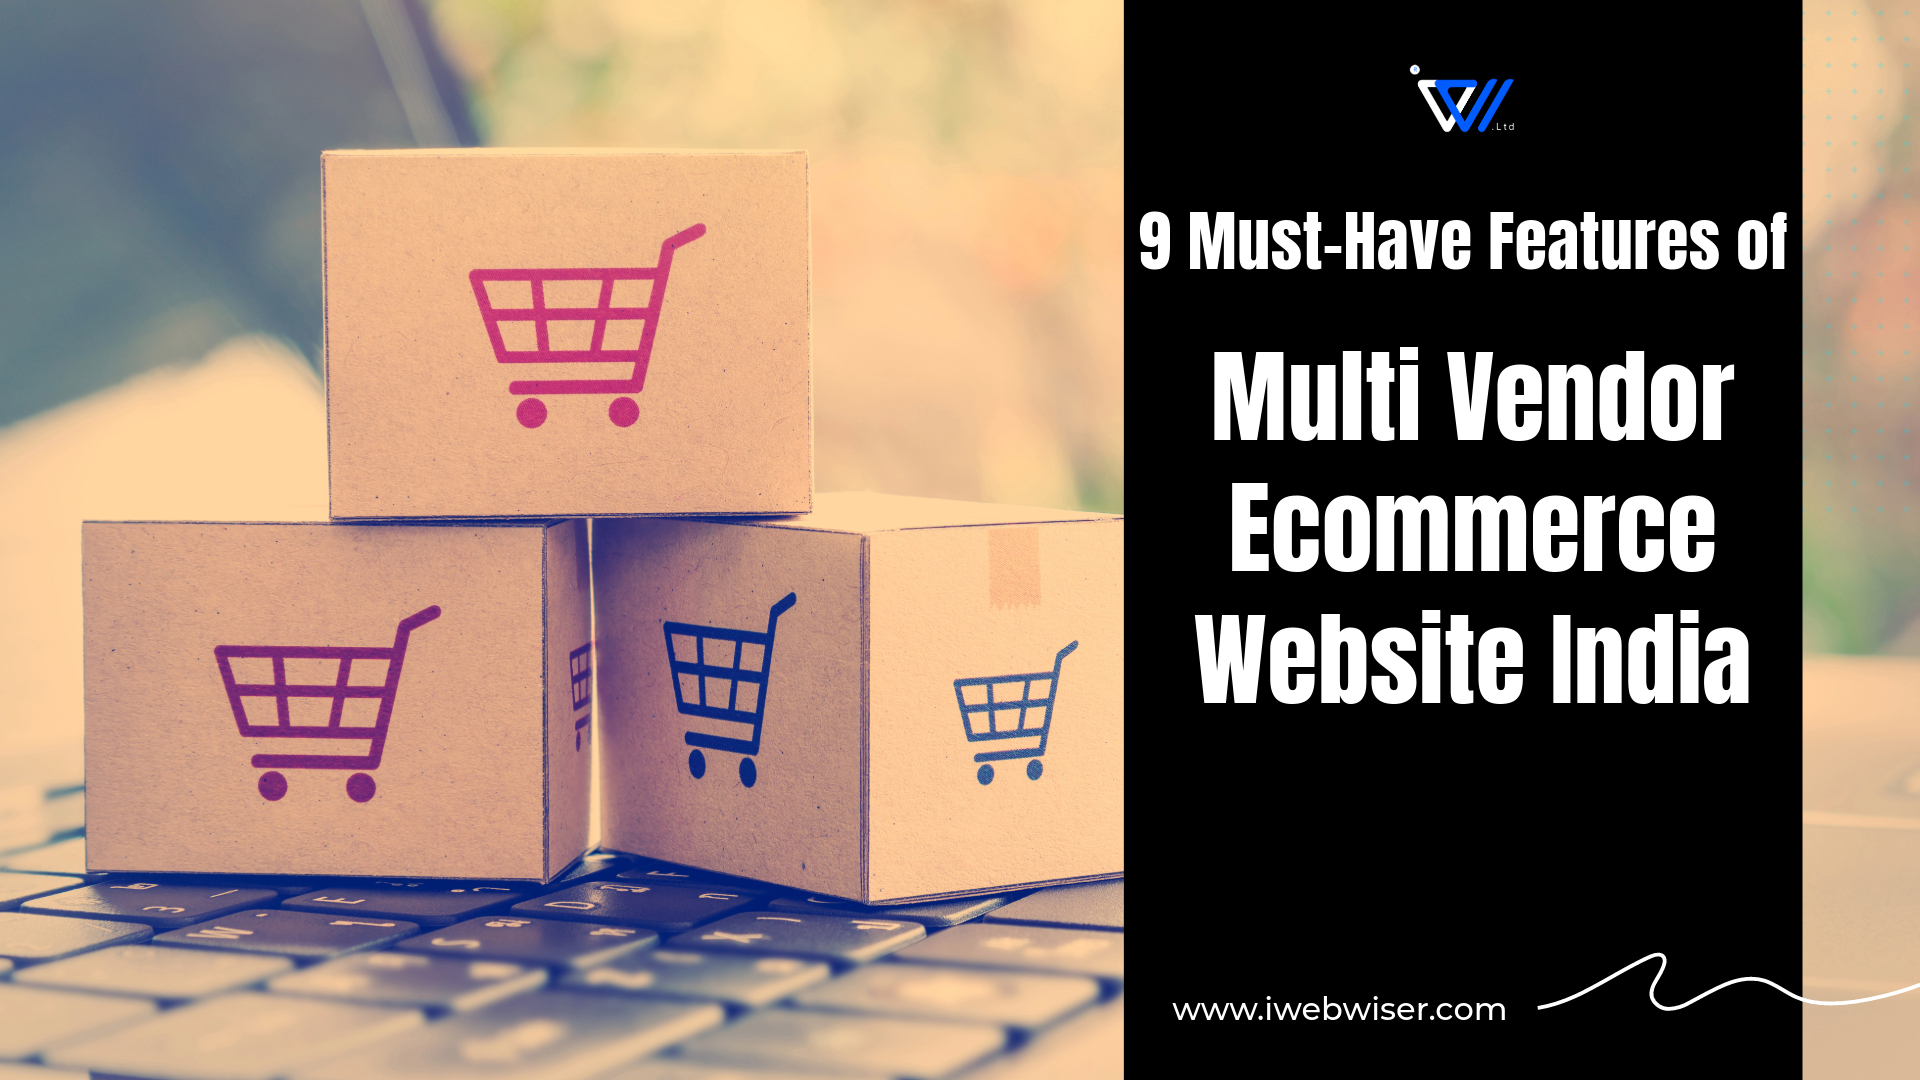 9 Must-Have Features of Multi Vendor Ecommerce Website India